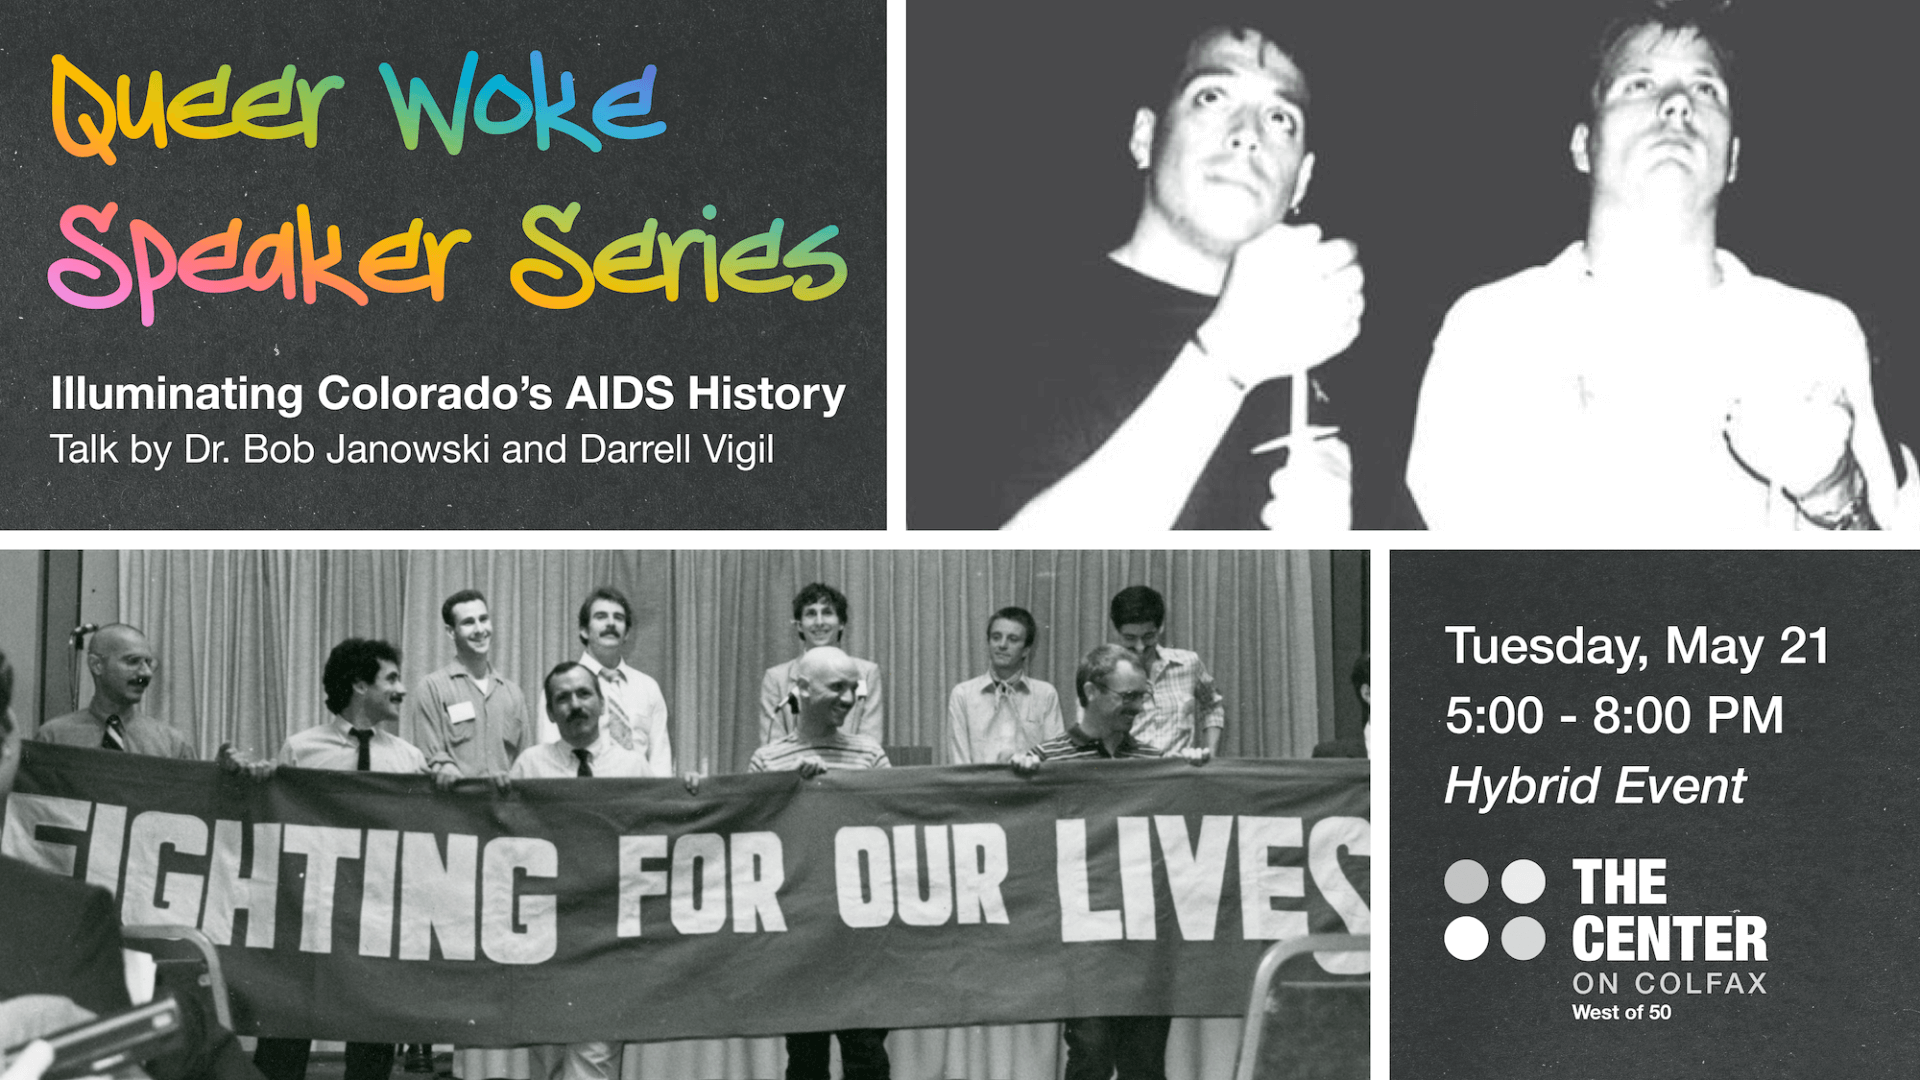 Queer Woke: Illuminating Colorado's HIV/AIDS History; Tuesday, May 21, 5:00 - 8:00 PM